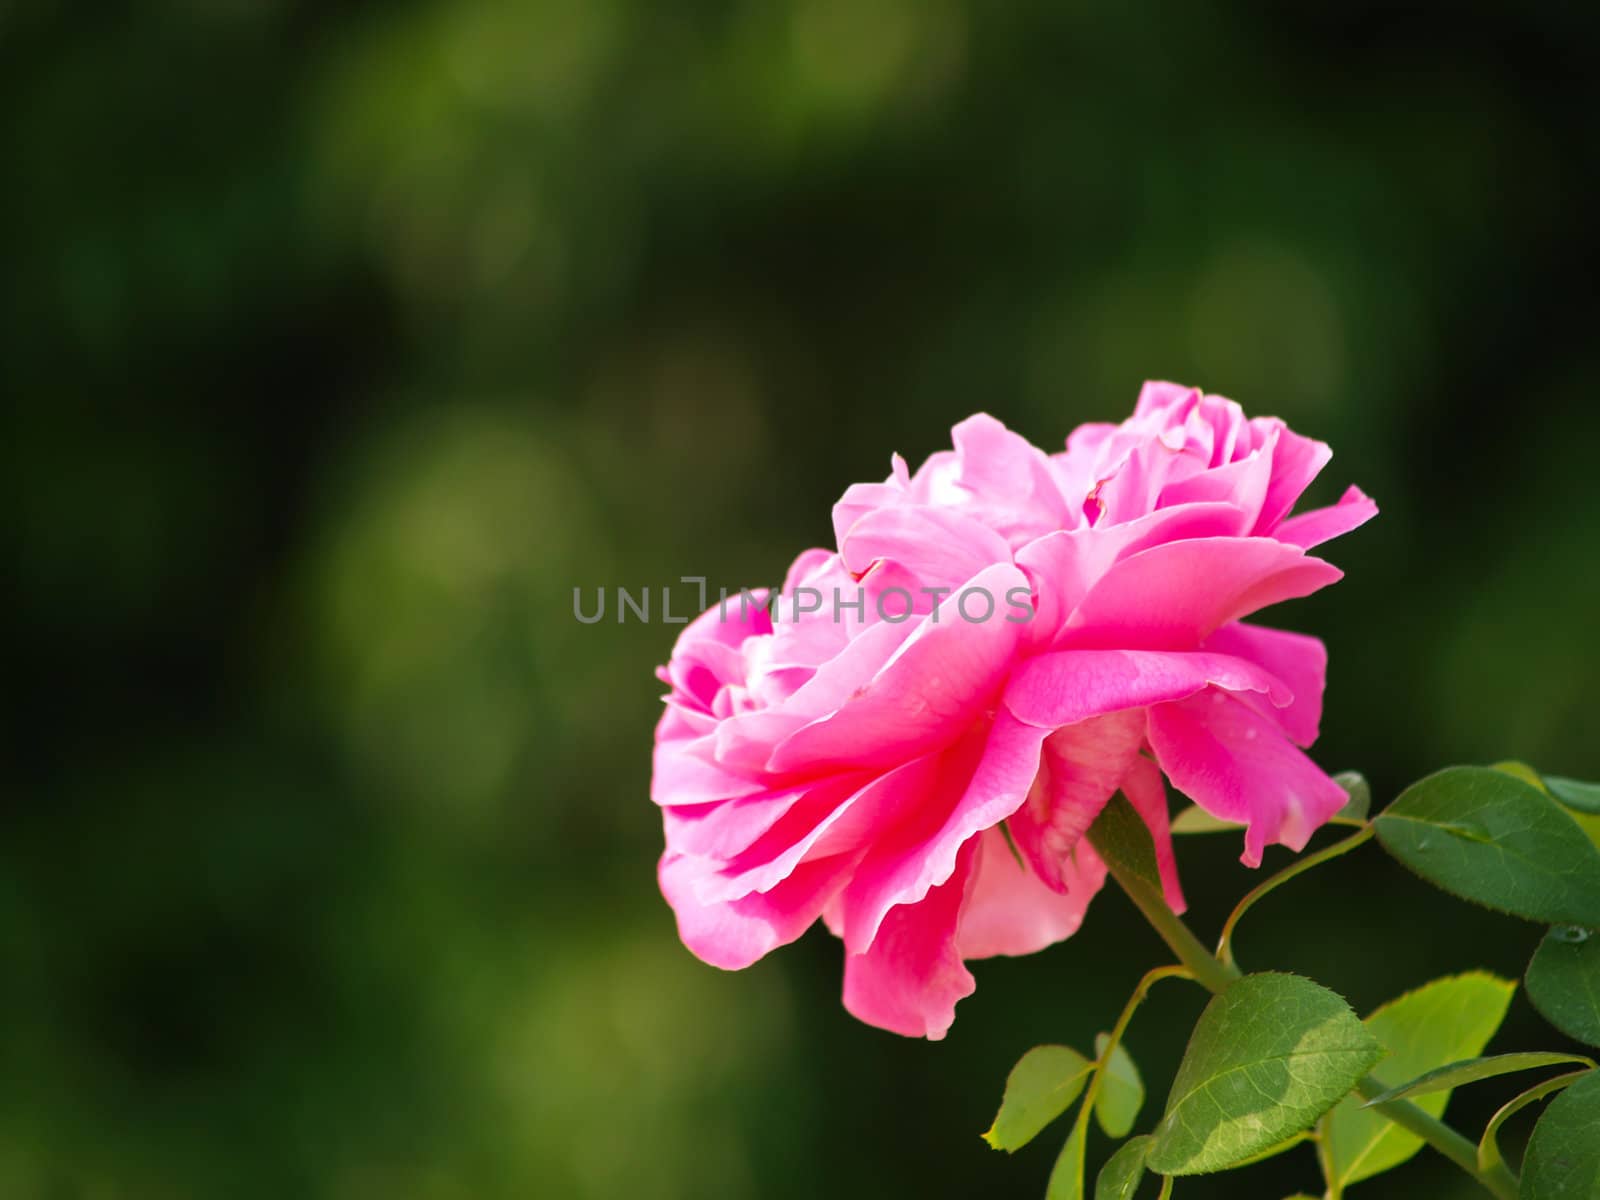 A pink Chulalongkorn rose in nature in Chiang Mai, Thailand